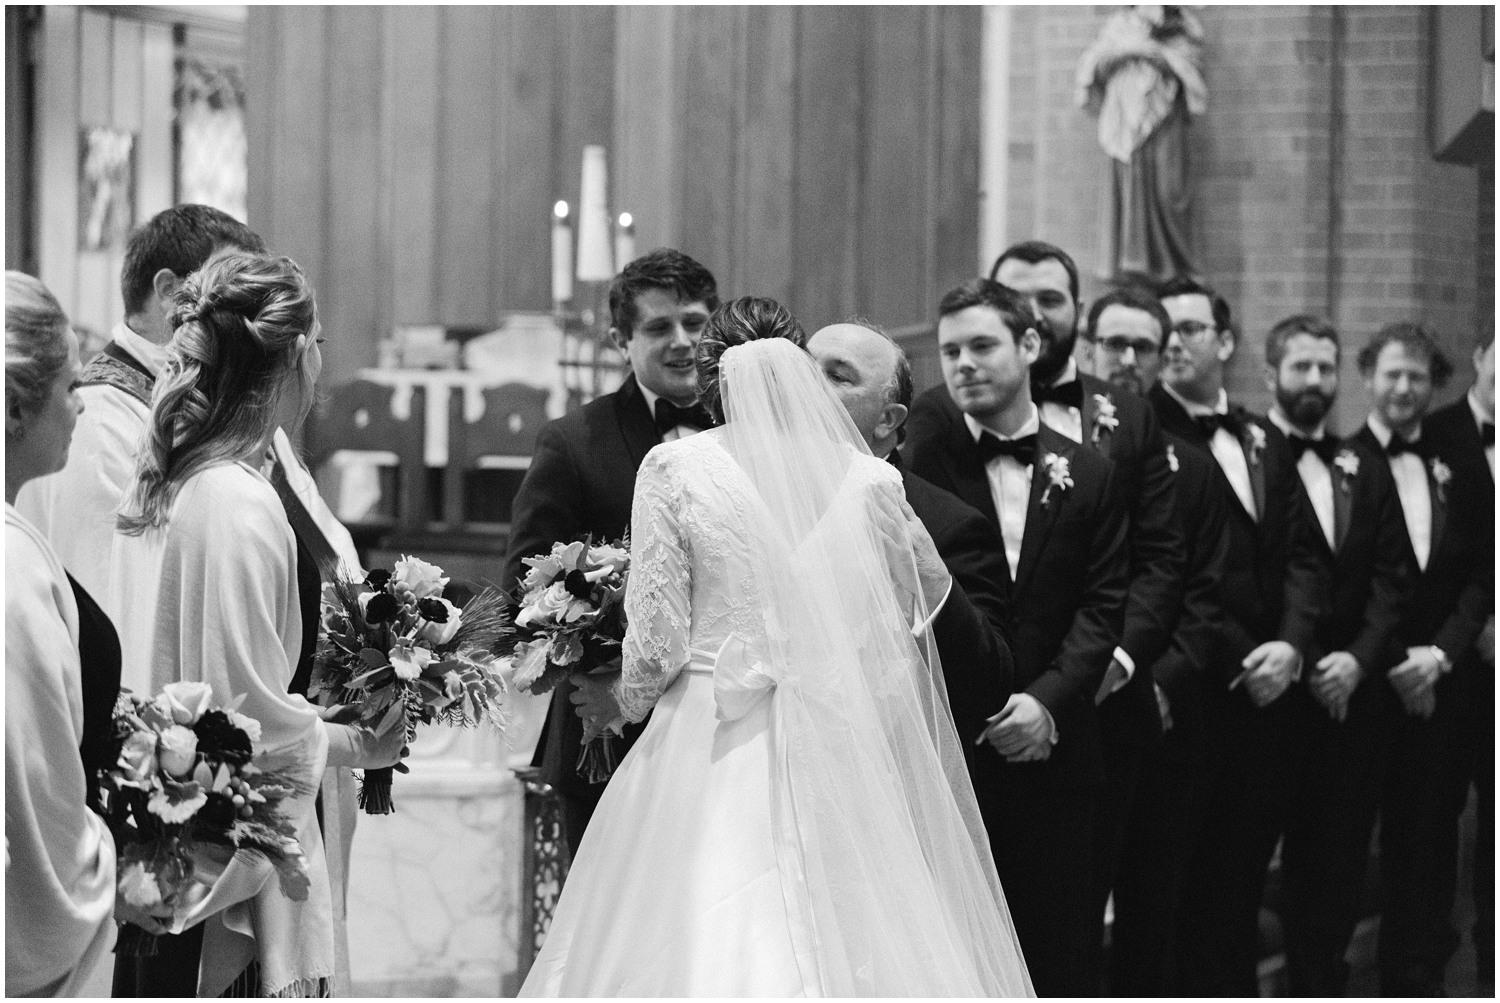 father gives away bride in traditional church wedding in North Carolina photographed by Chelsea Renay Photography